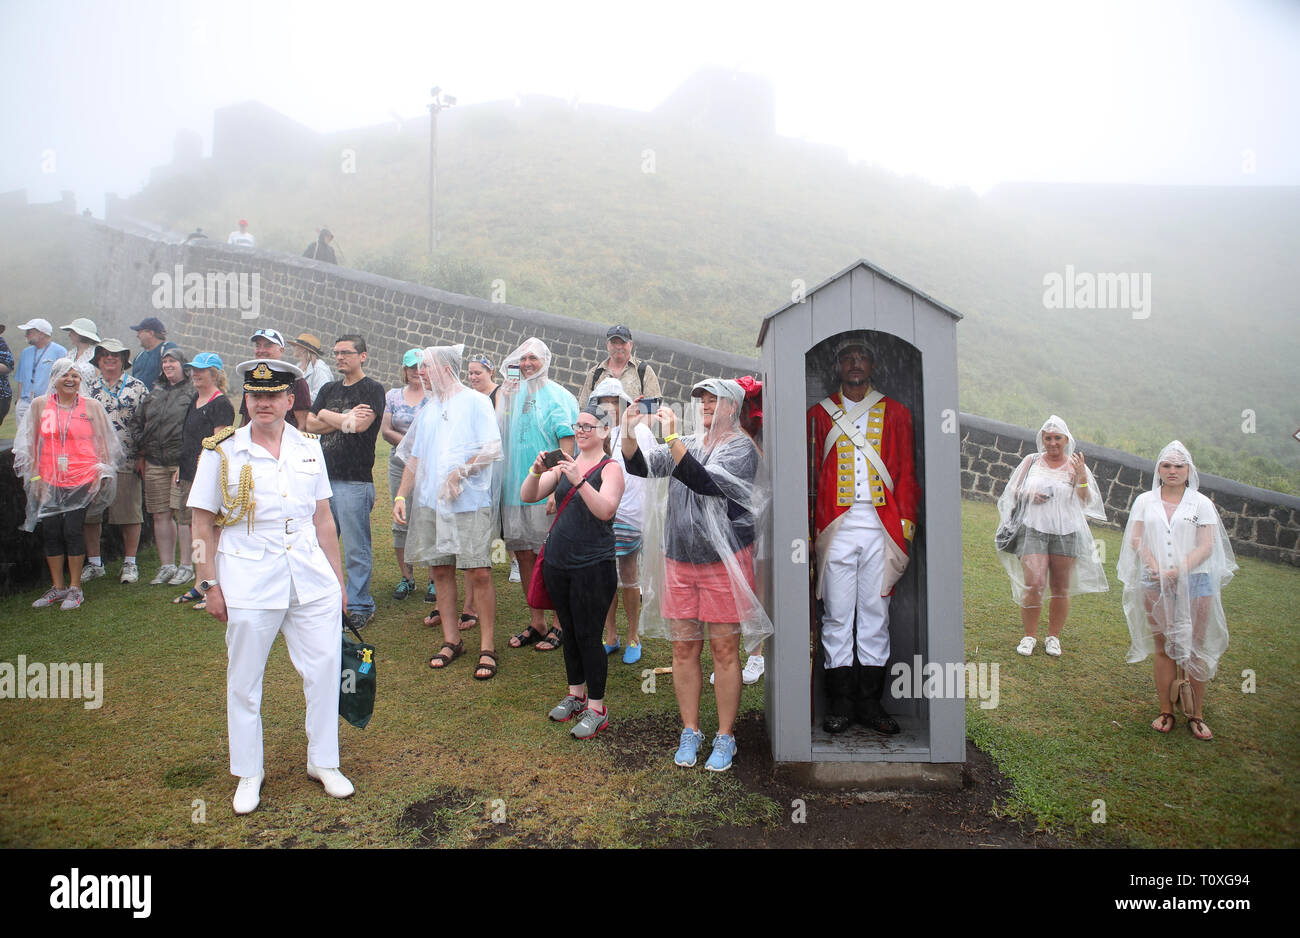 People watch the Prince of Wales during his visit to Brimstone Hill Fortress National Park in St. Kitts and Nevis, a UNESCO World Heritage site during a one day visit to the Caribbean islands. Stock Photo